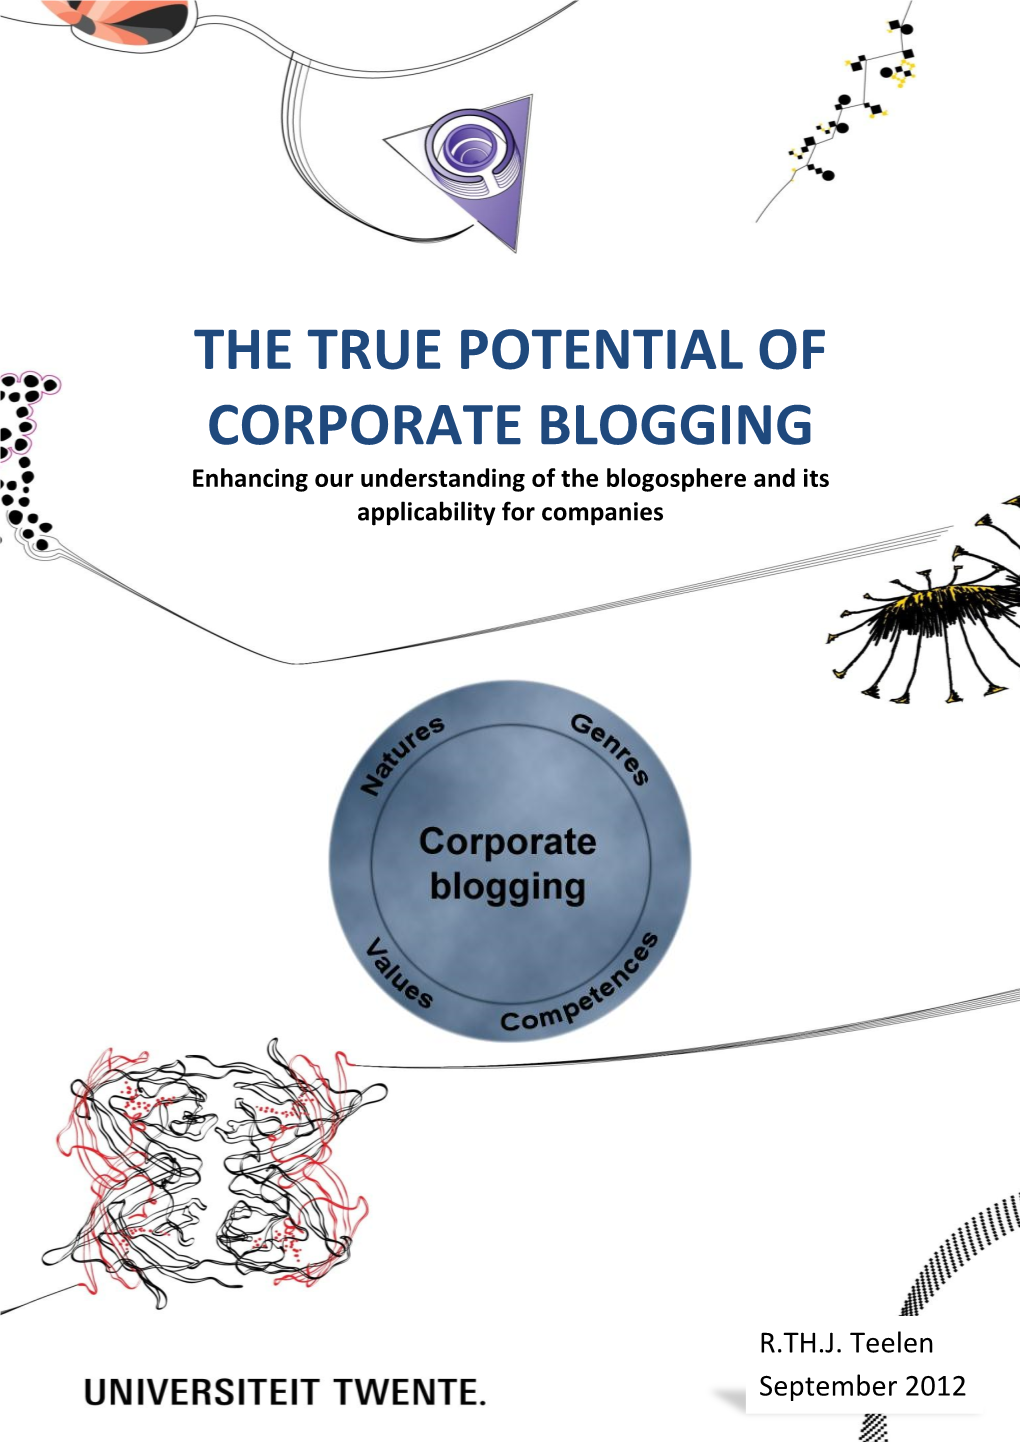 THE TRUE POTENTIAL of CORPORATE BLOGGING Enhancing Our Understanding of the Blogosphere and Its Applicability for Companies